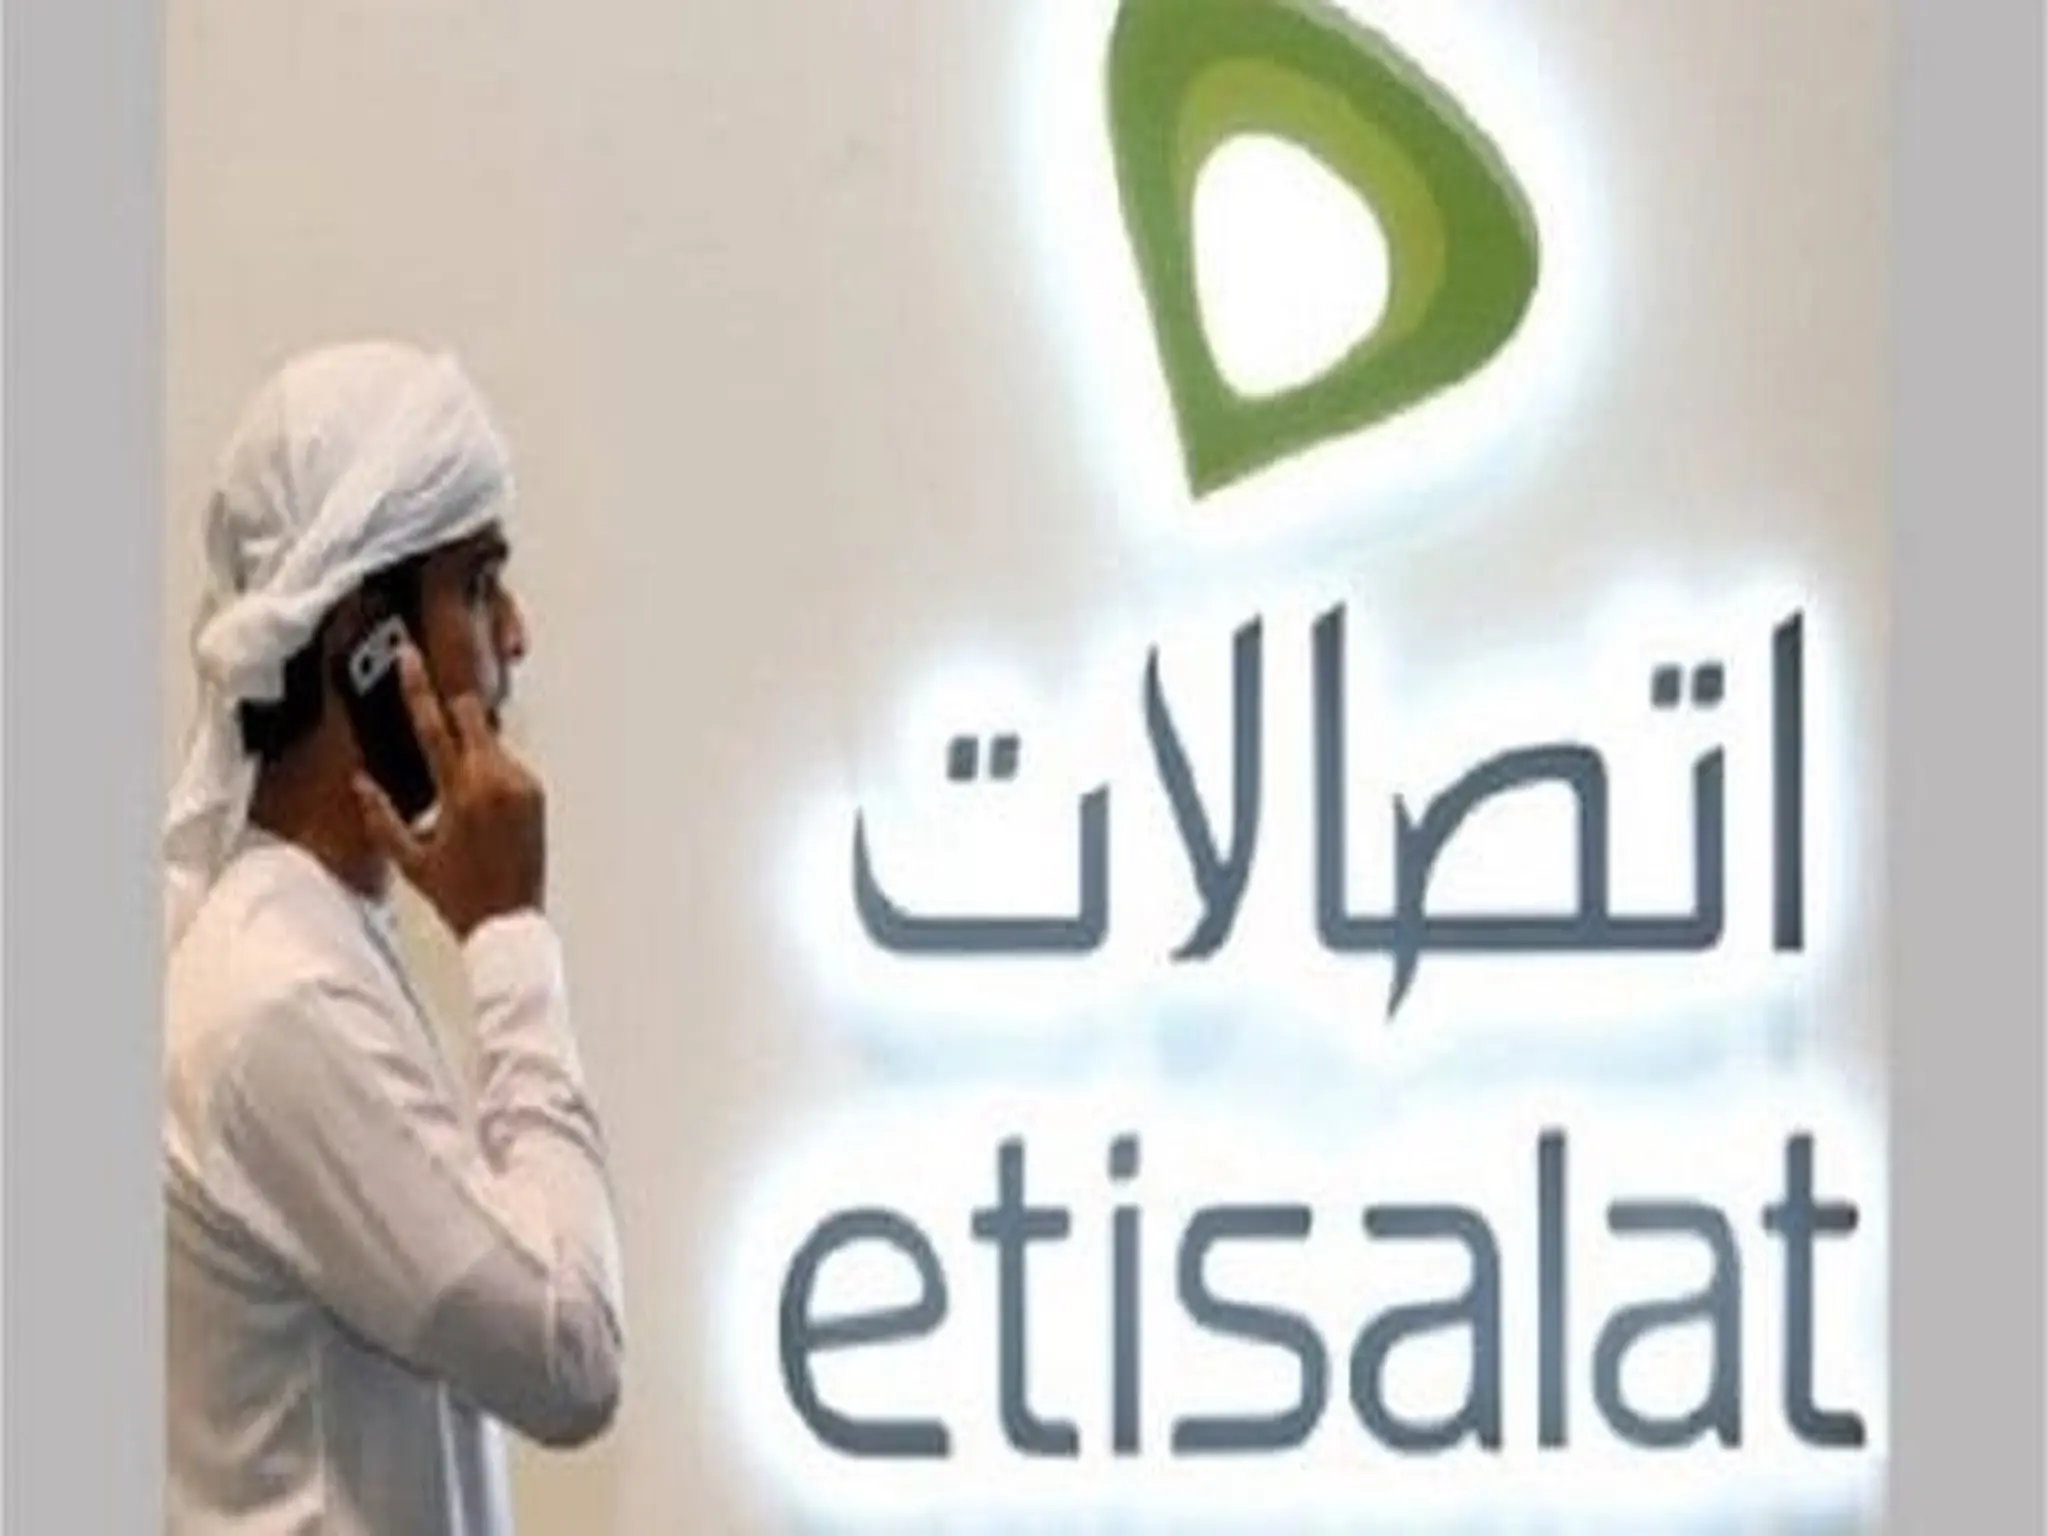 Etisalat determines the grace period for paying bills in the UAE